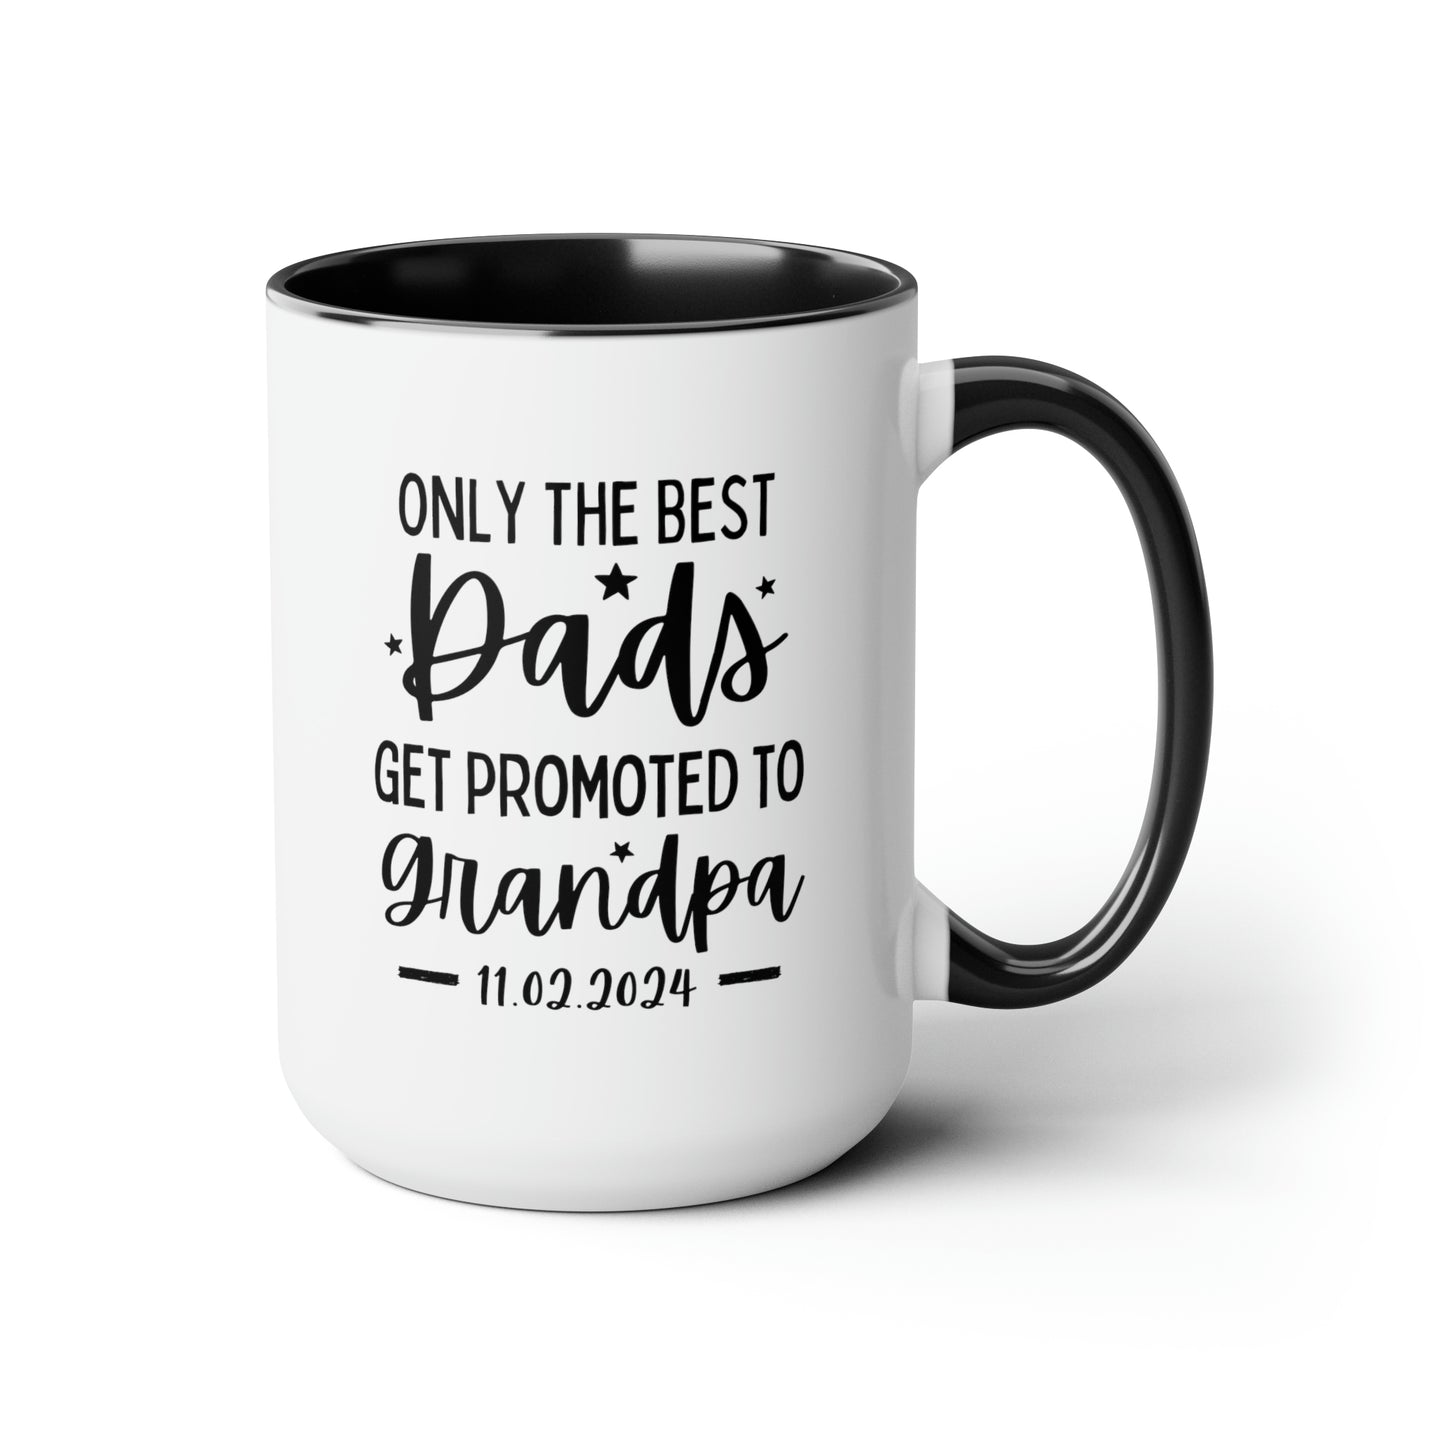 Only The Best Dads Get Promoted To Grandpa 15oz white with black accent funny large coffee mug gift for granddad grandfather grandpa birthday christmas men fathers day waveywares wavey wares wavywares wavy wares